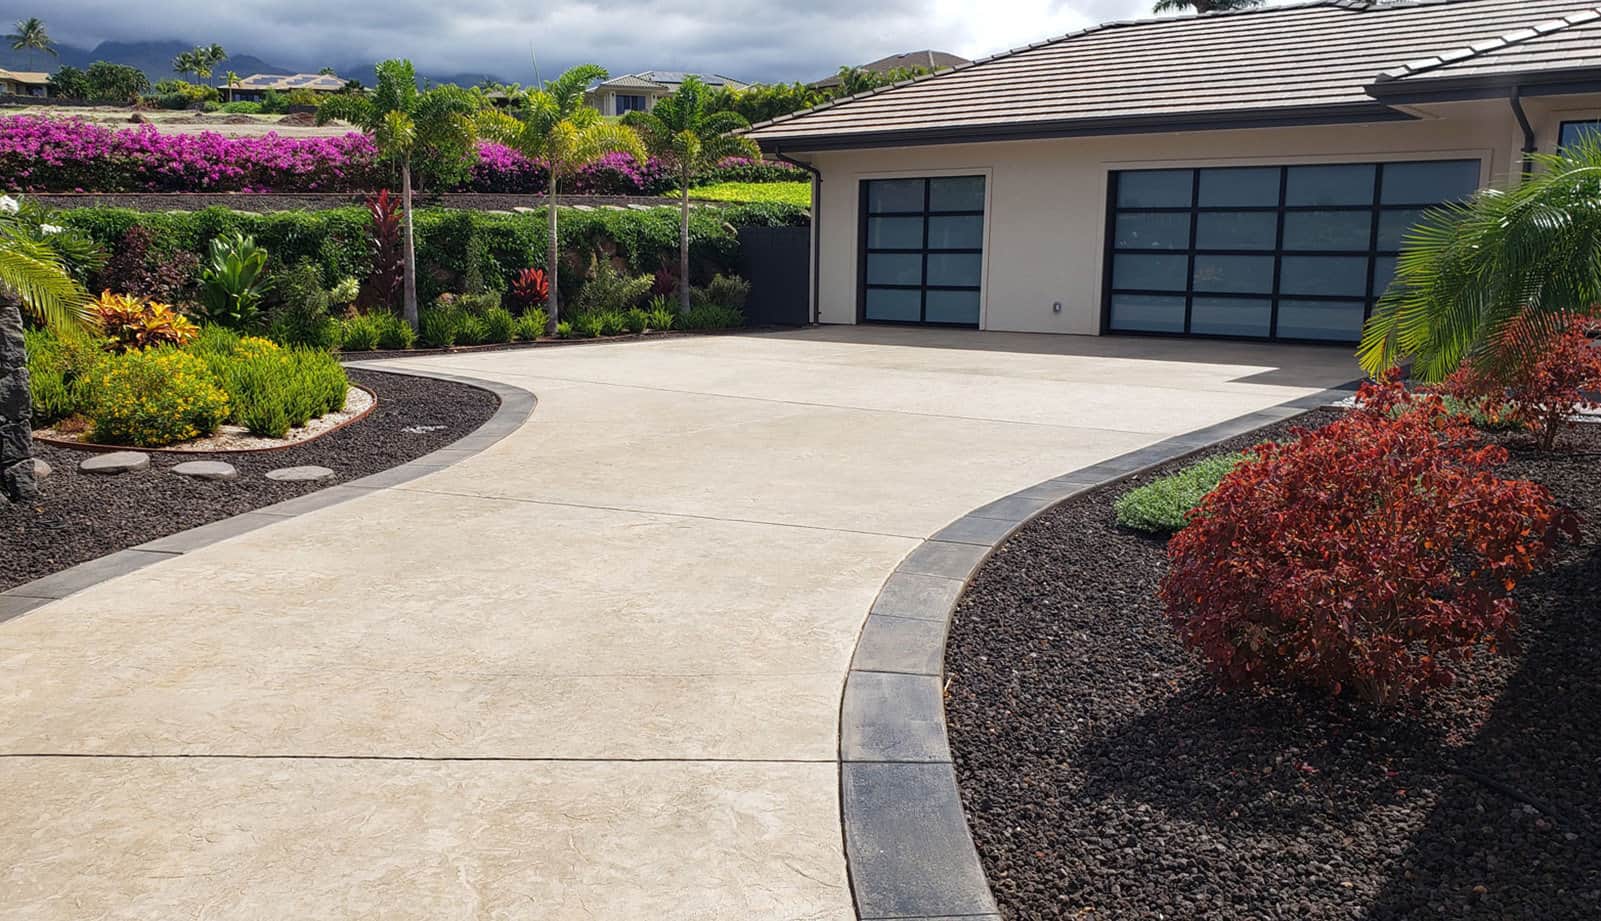 Stamped driveway with decorative edging designed and built by Crescent Homes Maui